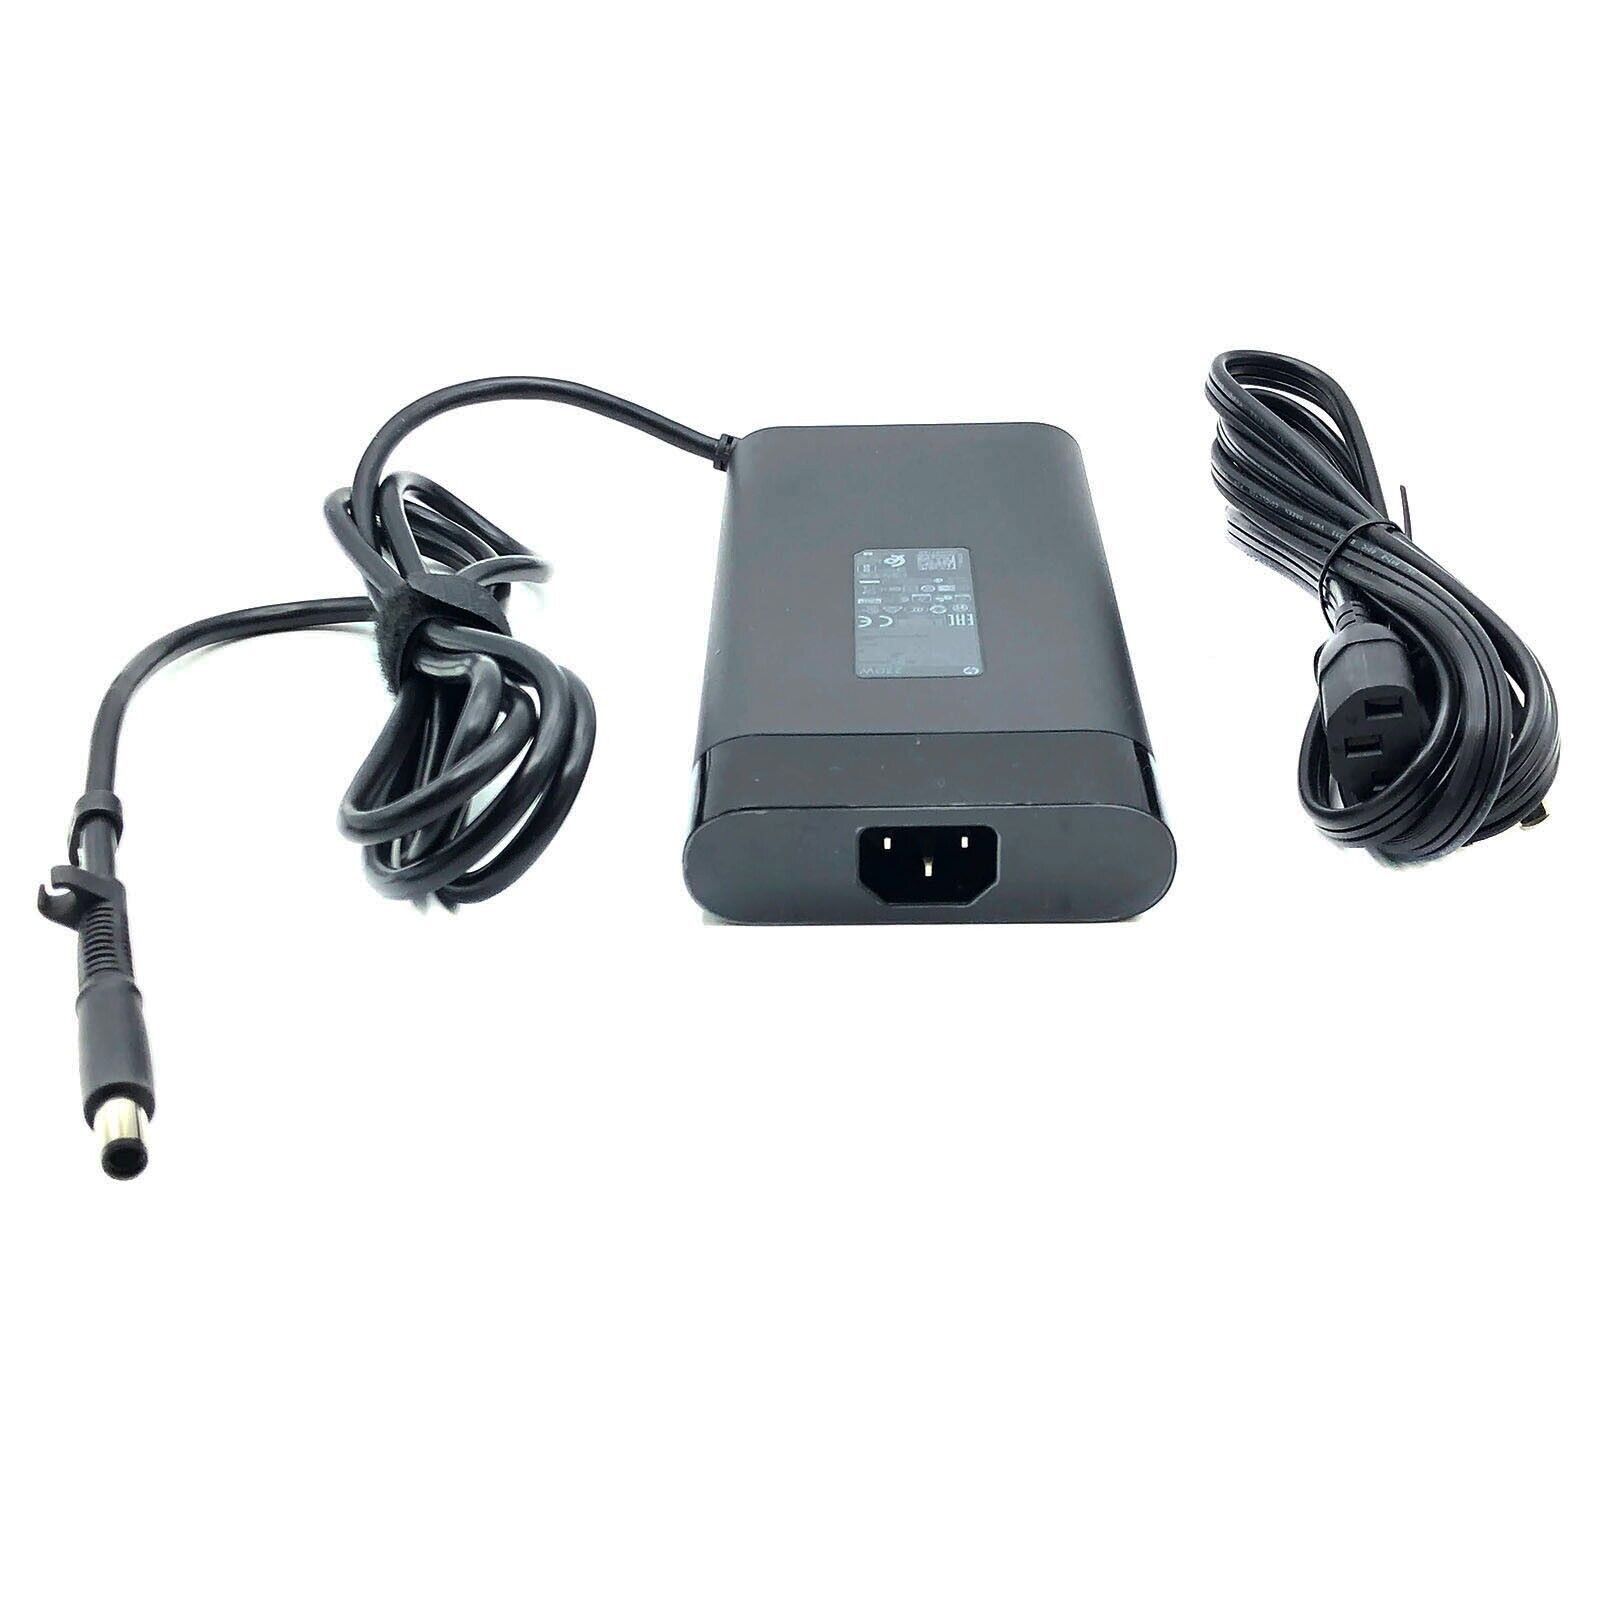 Authentic HP 230W AC DC Power Adapter for Z2 Mini G3 G4 Desktop PC Workstations